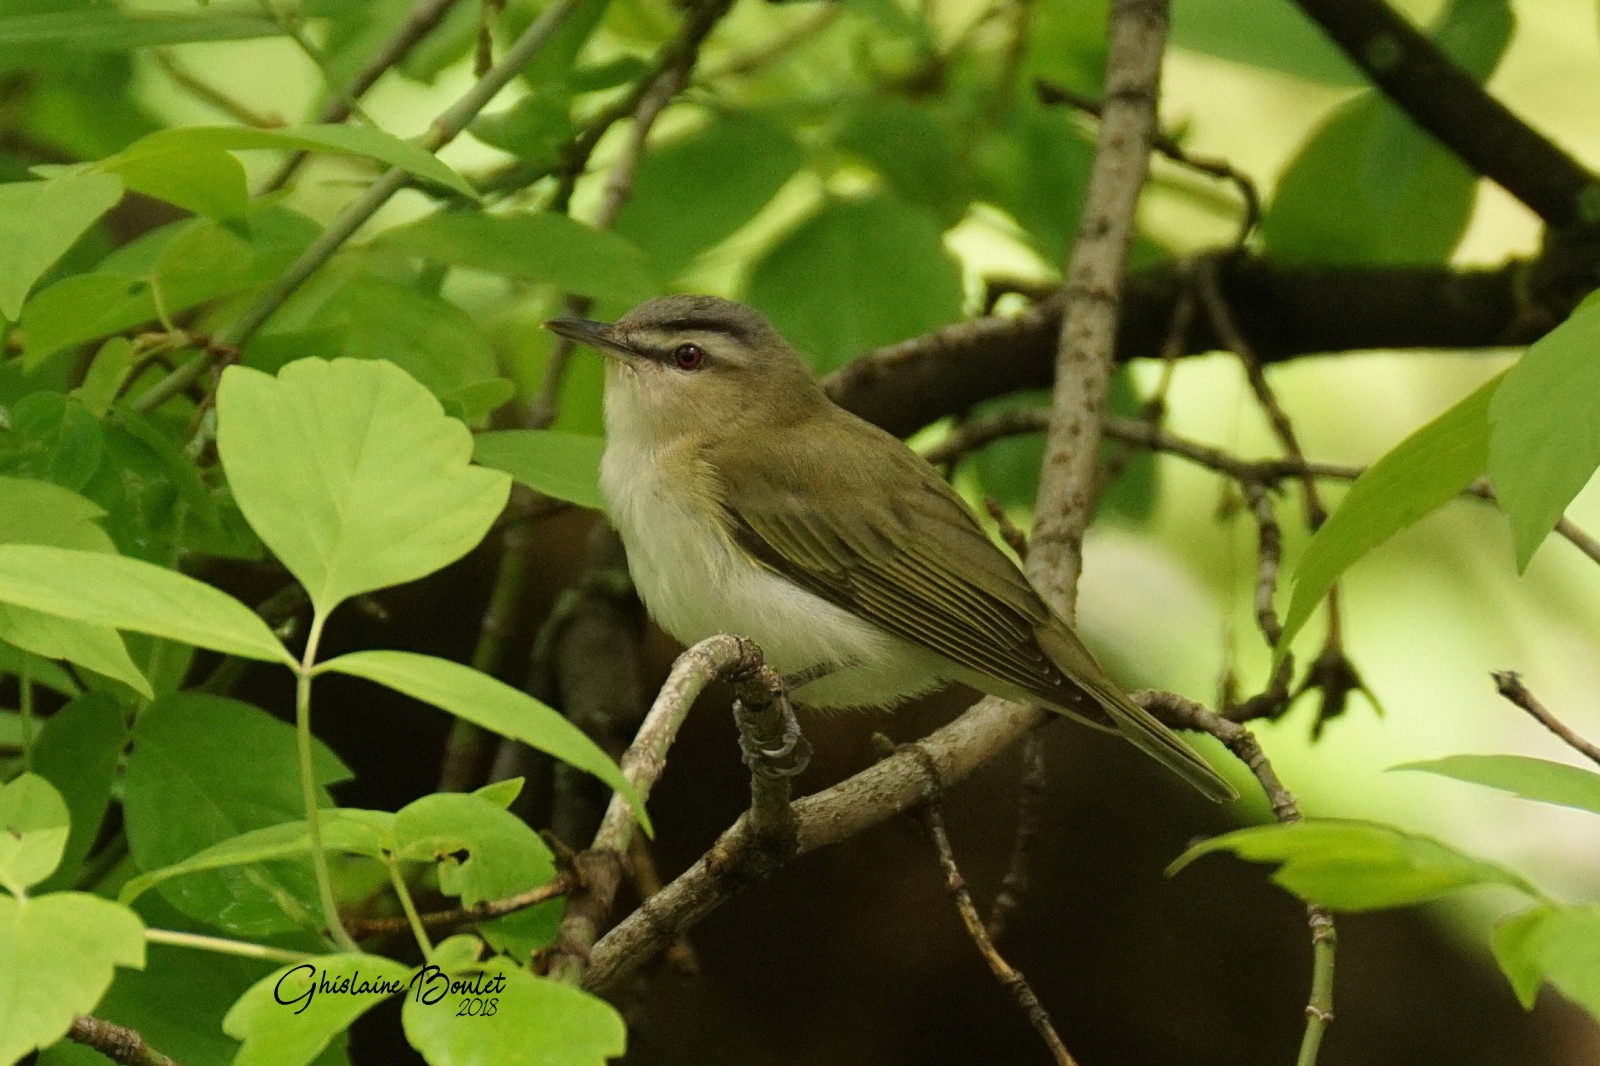 Viro aux yeux rouges (Red-eyed Vireo)